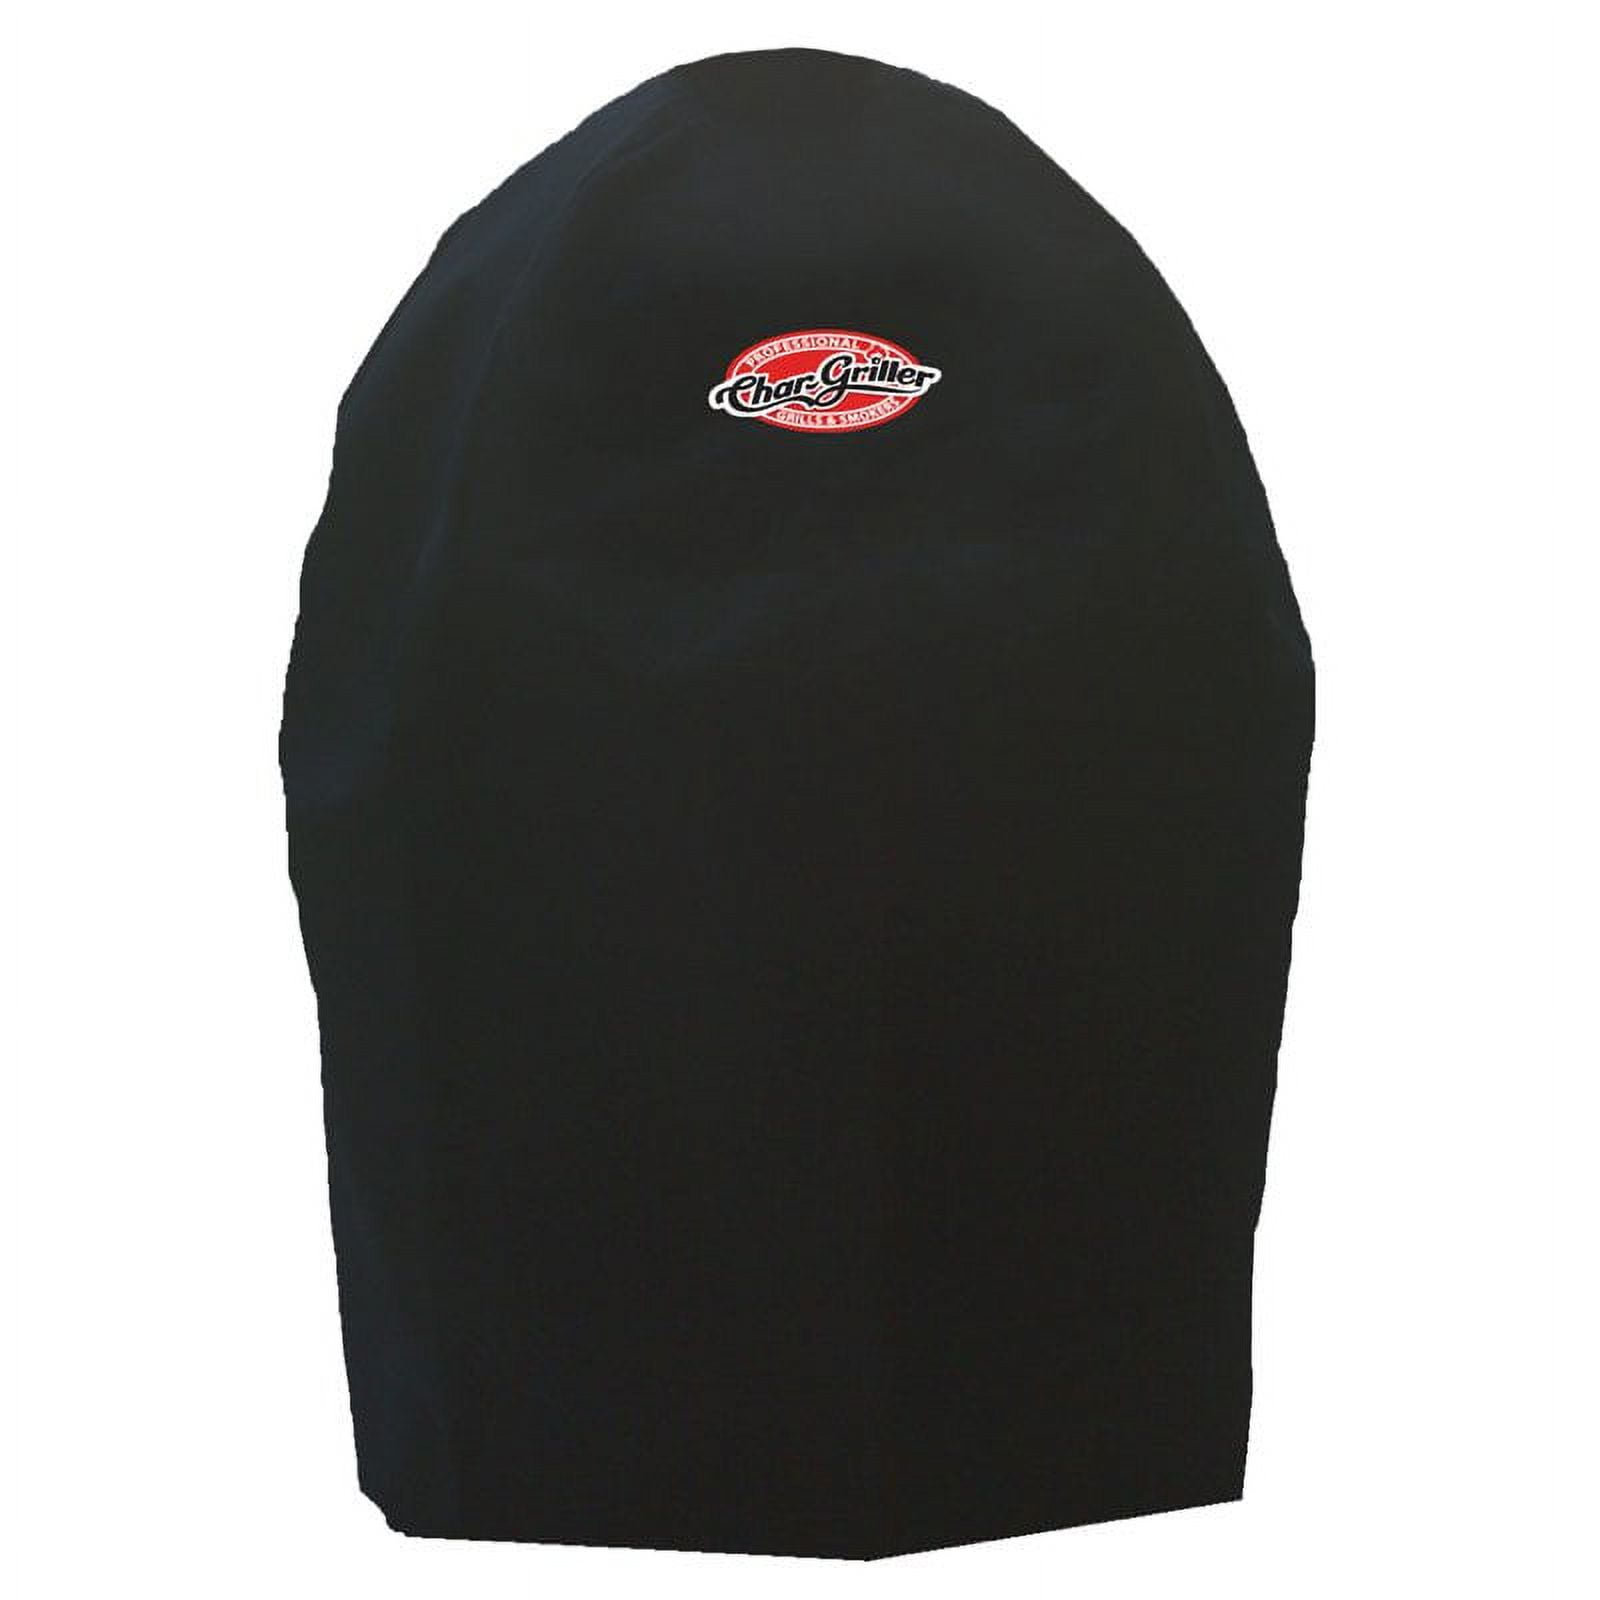 Buy Char-Griller Protective Cover Online Nepal